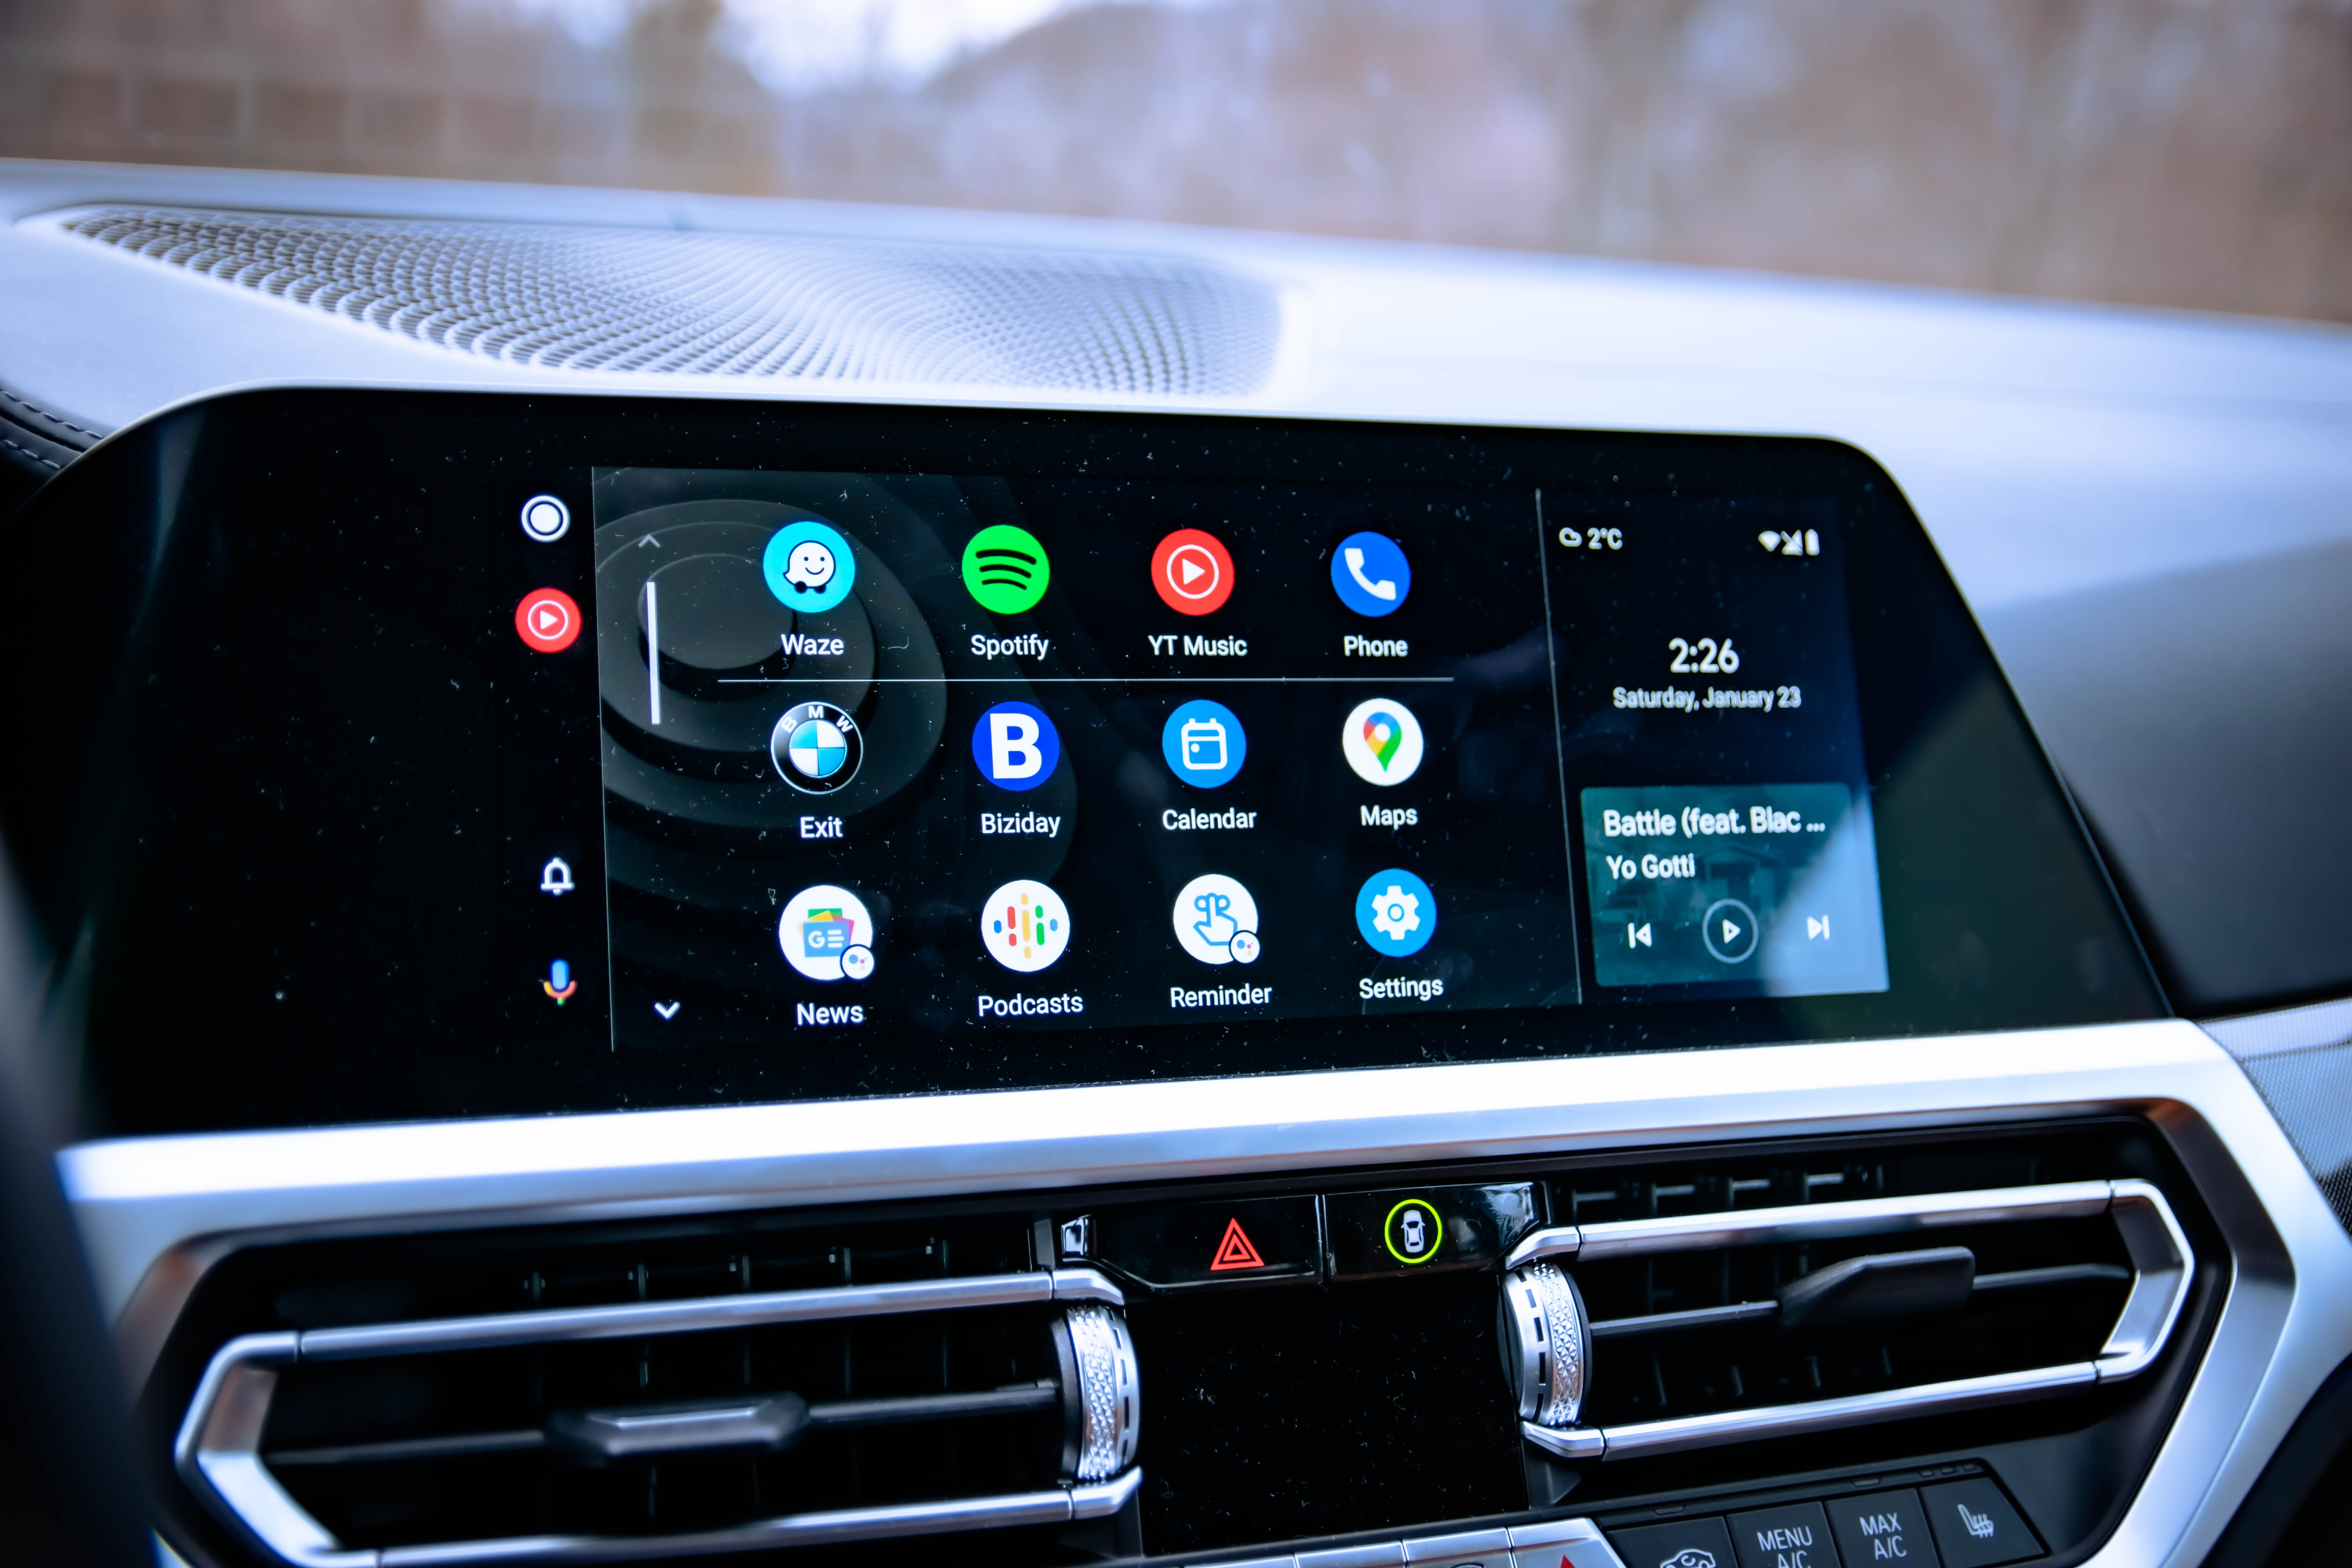 5 Tips for Choosing the Best Cable for Android Auto - autoevolution